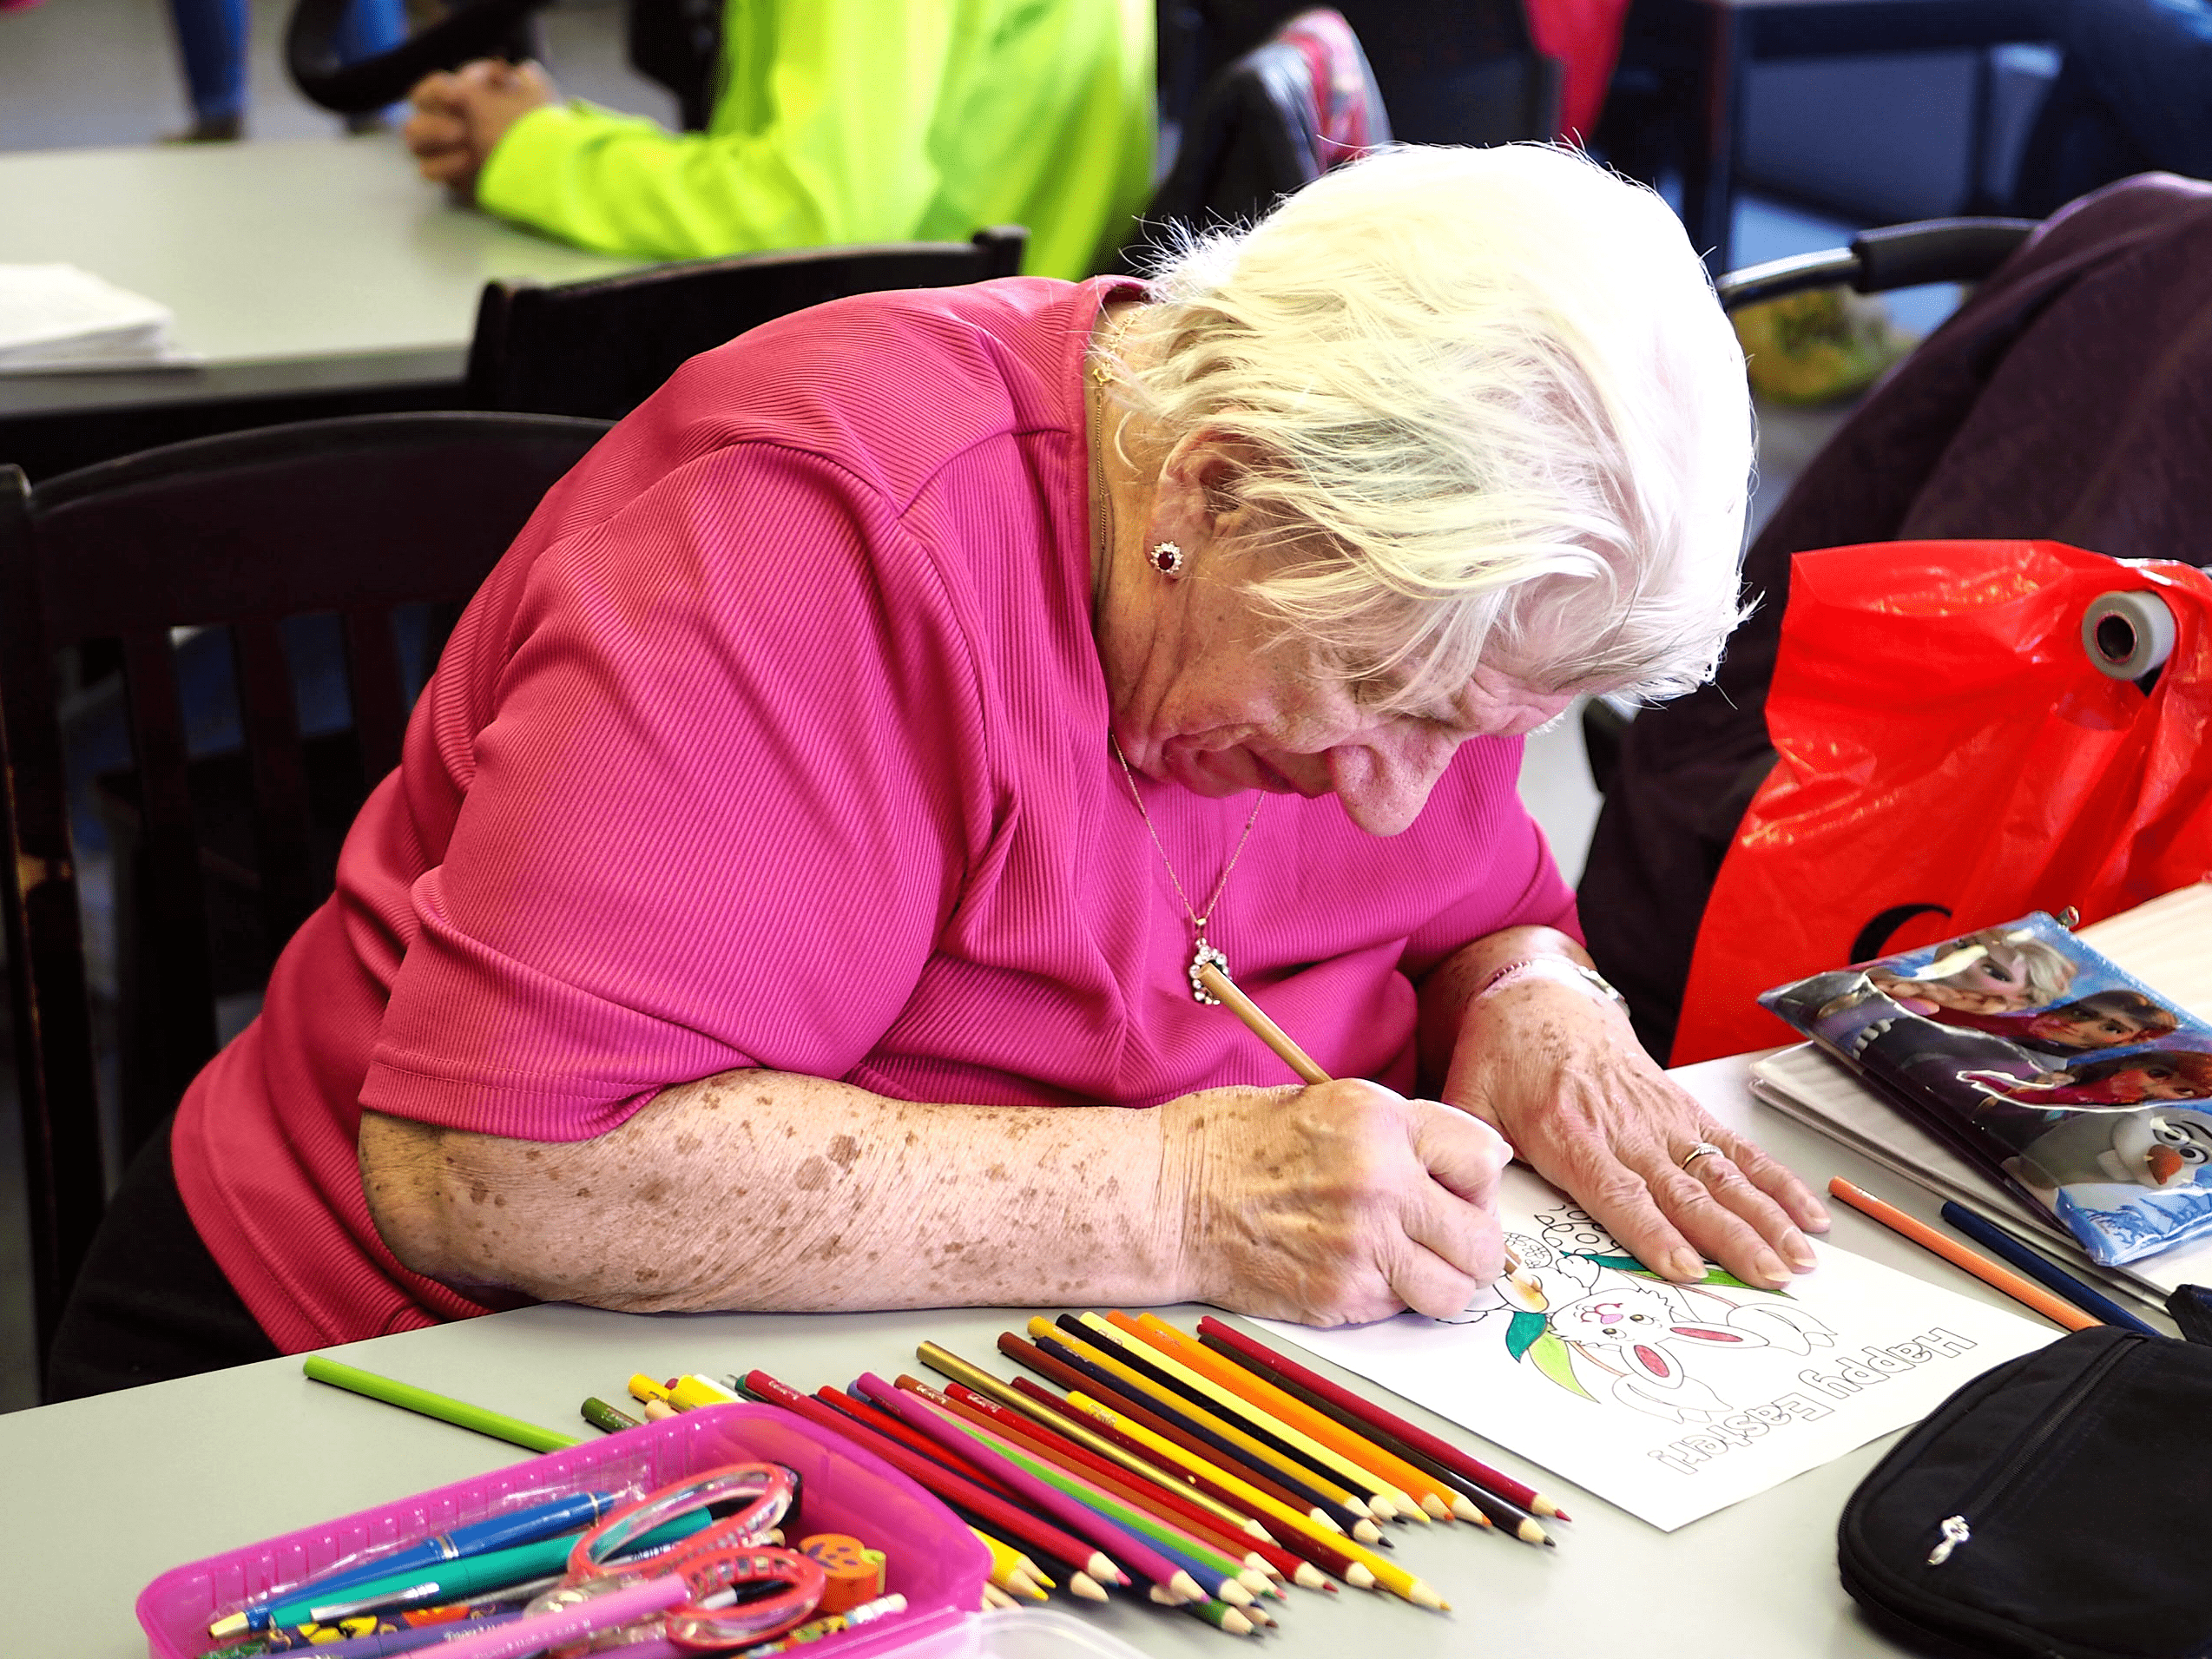 An older woman is seated at a desk colouring a picture. There are many pencil crayons on the desk beside her.